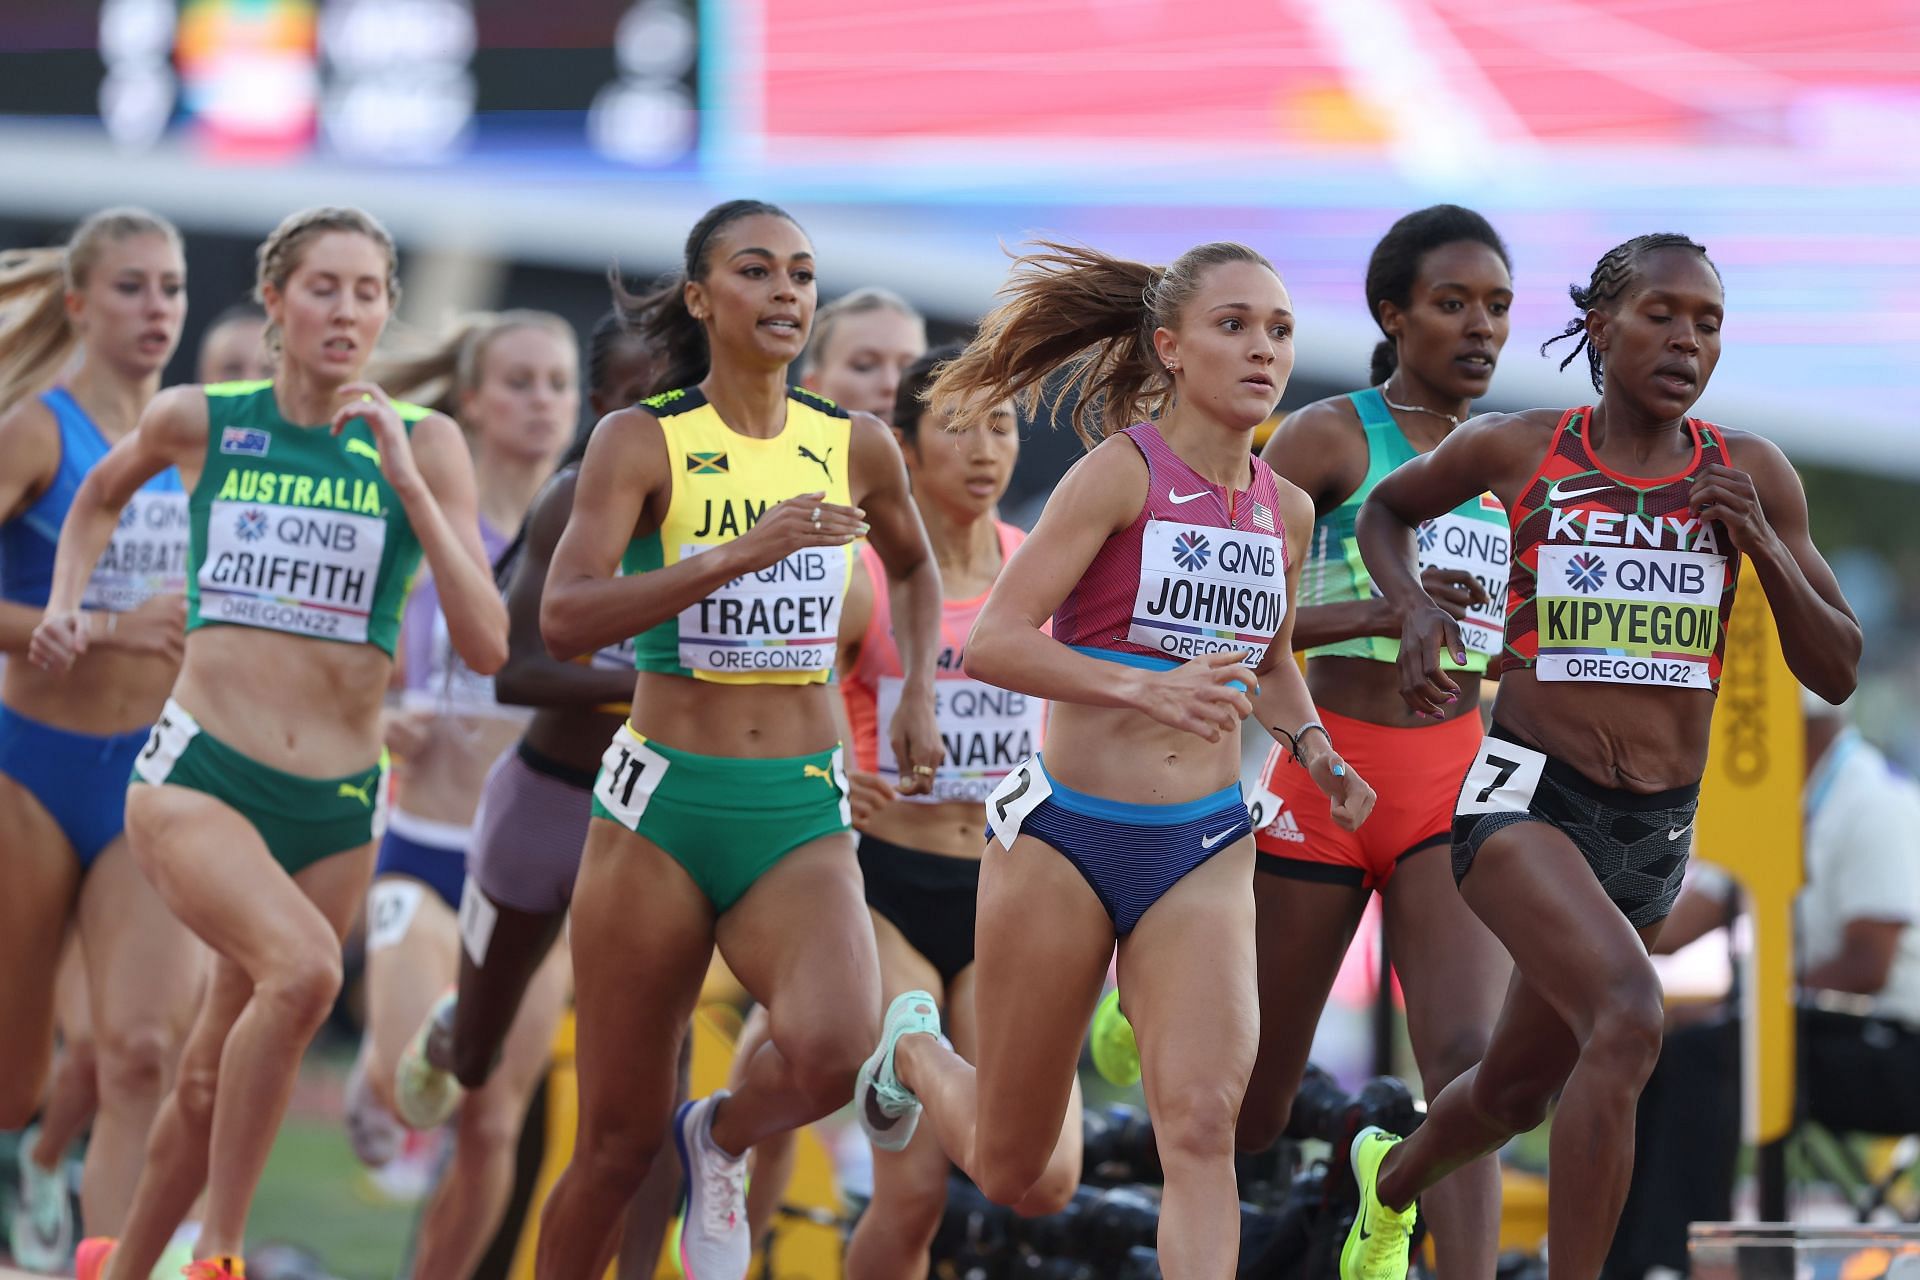 World Athletics Championships Oregon22 : Johnson of Team United States competes in the Women&rsquo;s 1500 meter semi-final